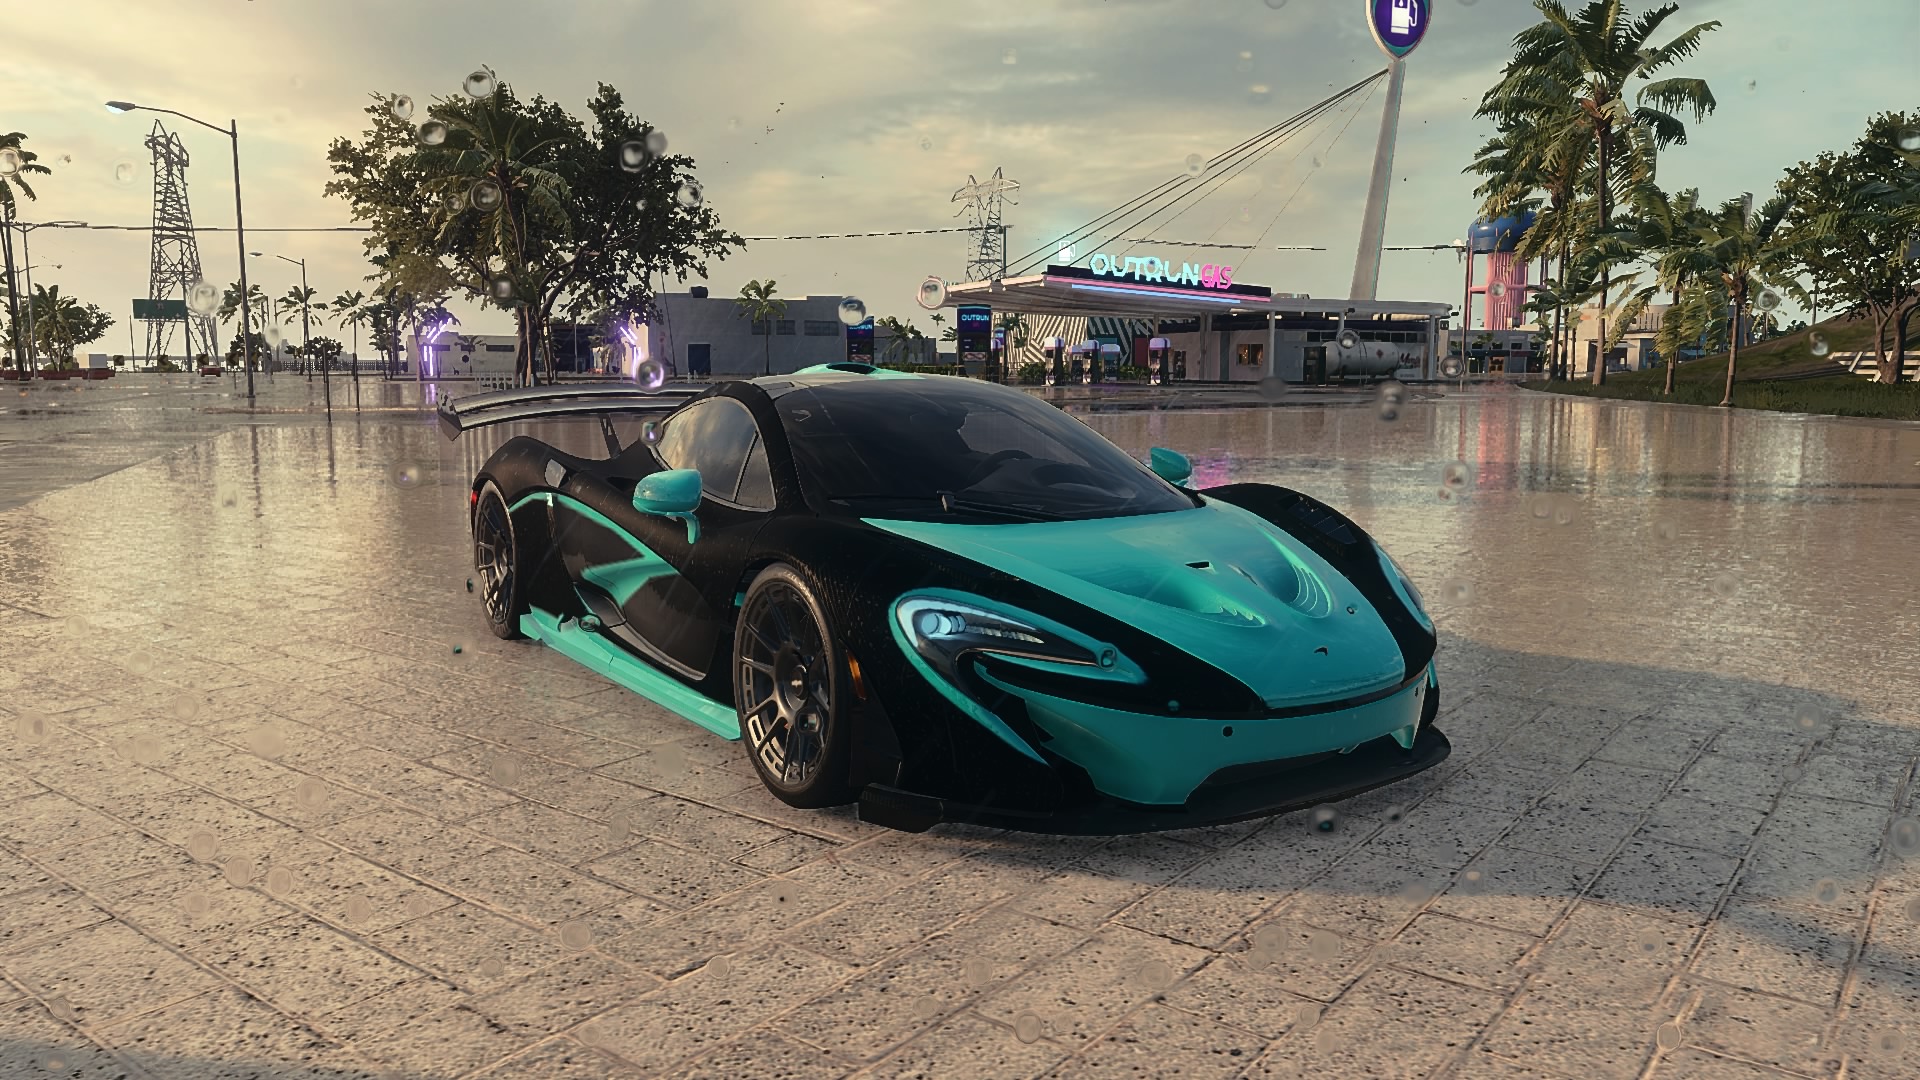 General 1920x1080 car Need for Speed: Heat light blue McLaren P1 gas station PlayStation 4